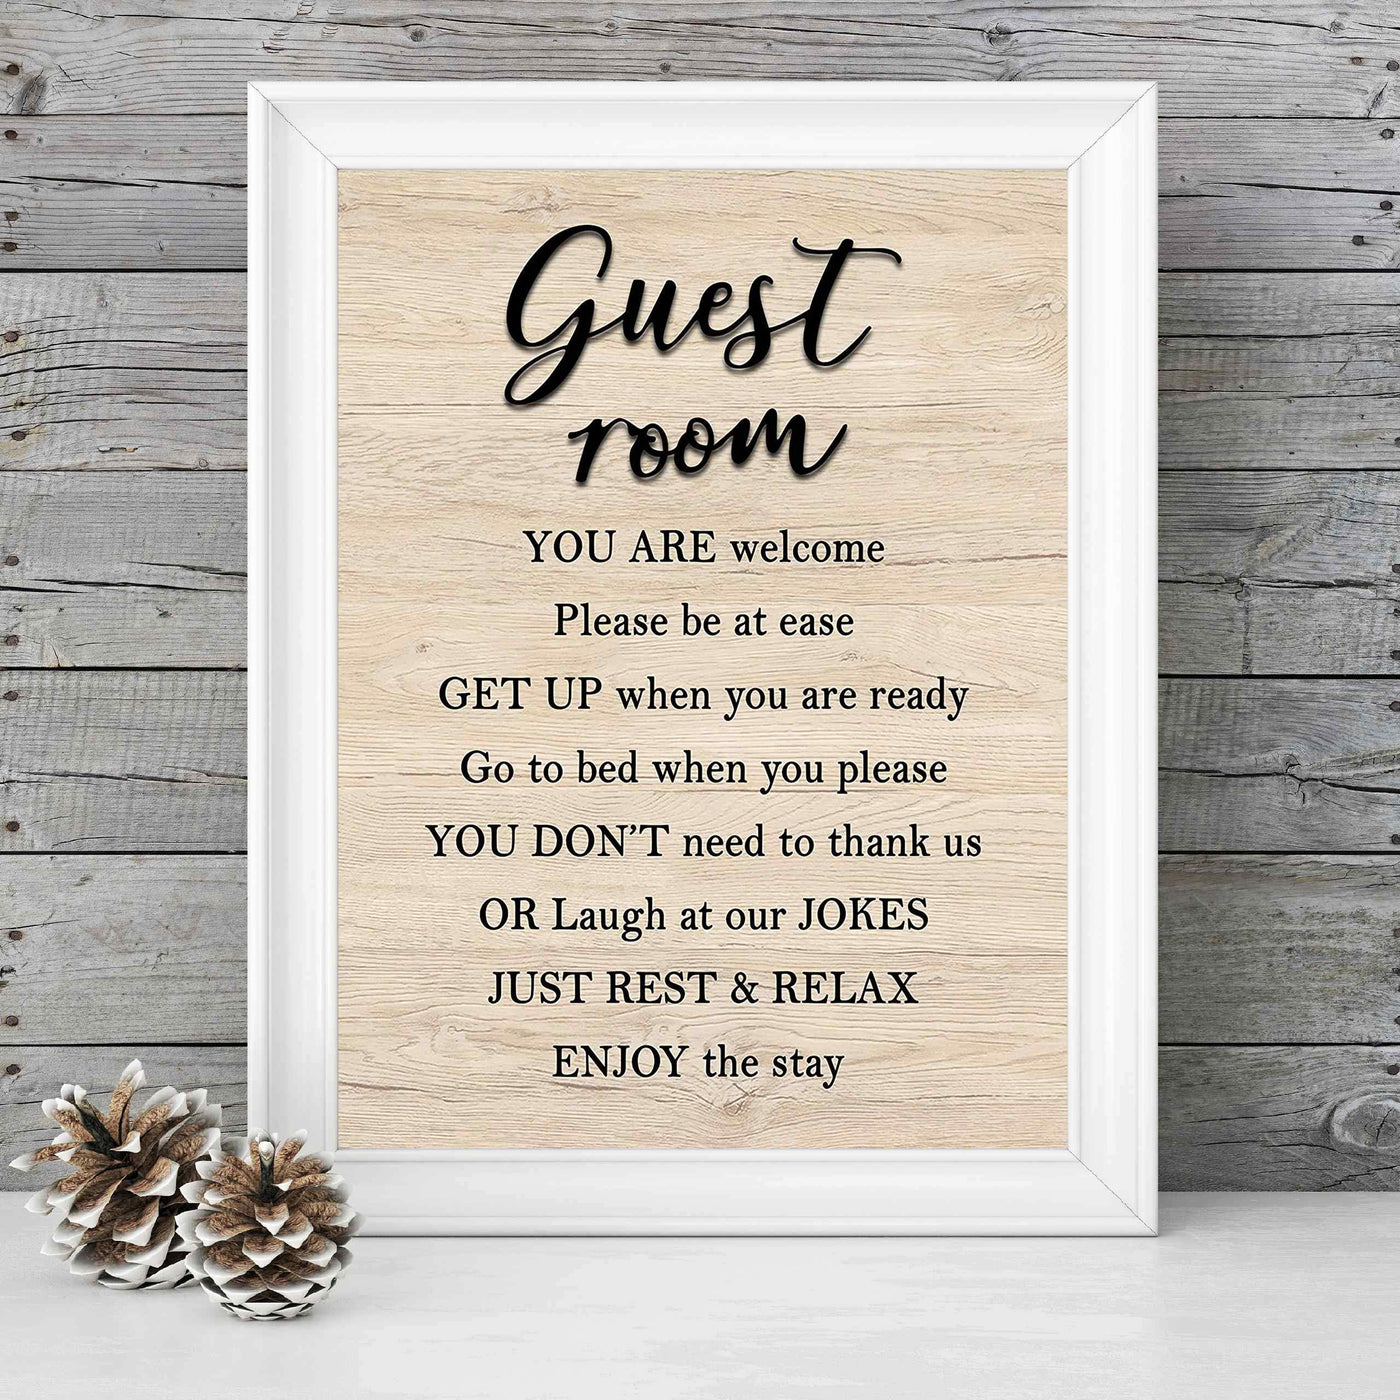 Guest Room-Enjoy The Stay- Welcome Sign Wall Art -8 x 10" Country Rustic Print with Replica Wood Design-Ready to Frame. Home-Guest Room-B&B-Cabin-Lake House-Beach Decor. Printed on Paper-Not Wood.